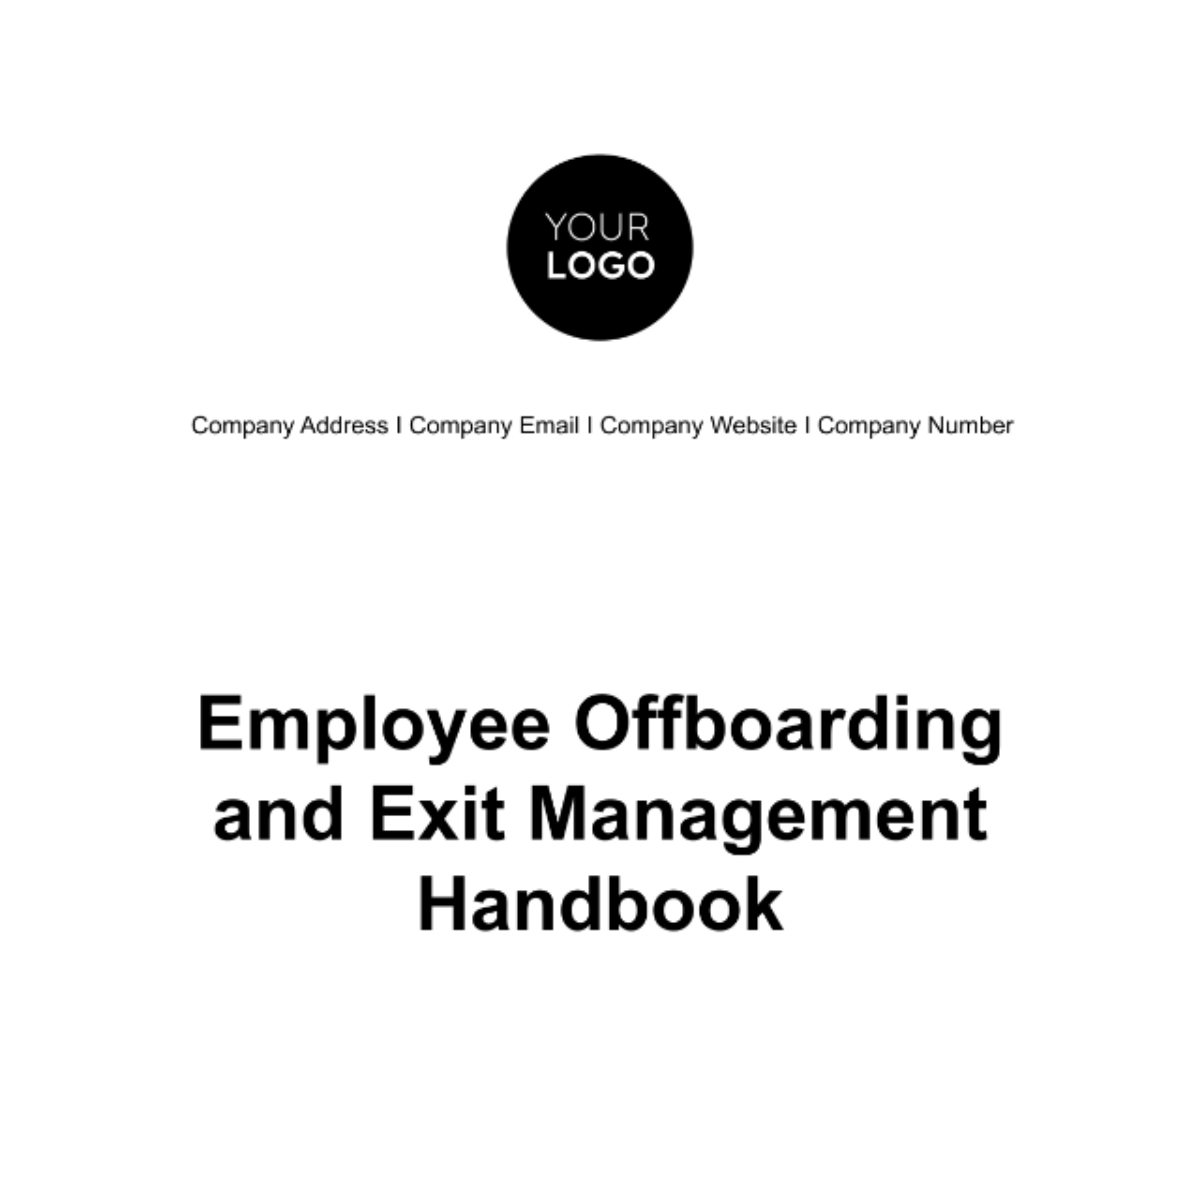 Free Employee Offboarding and Exit Management Handbook HR Template